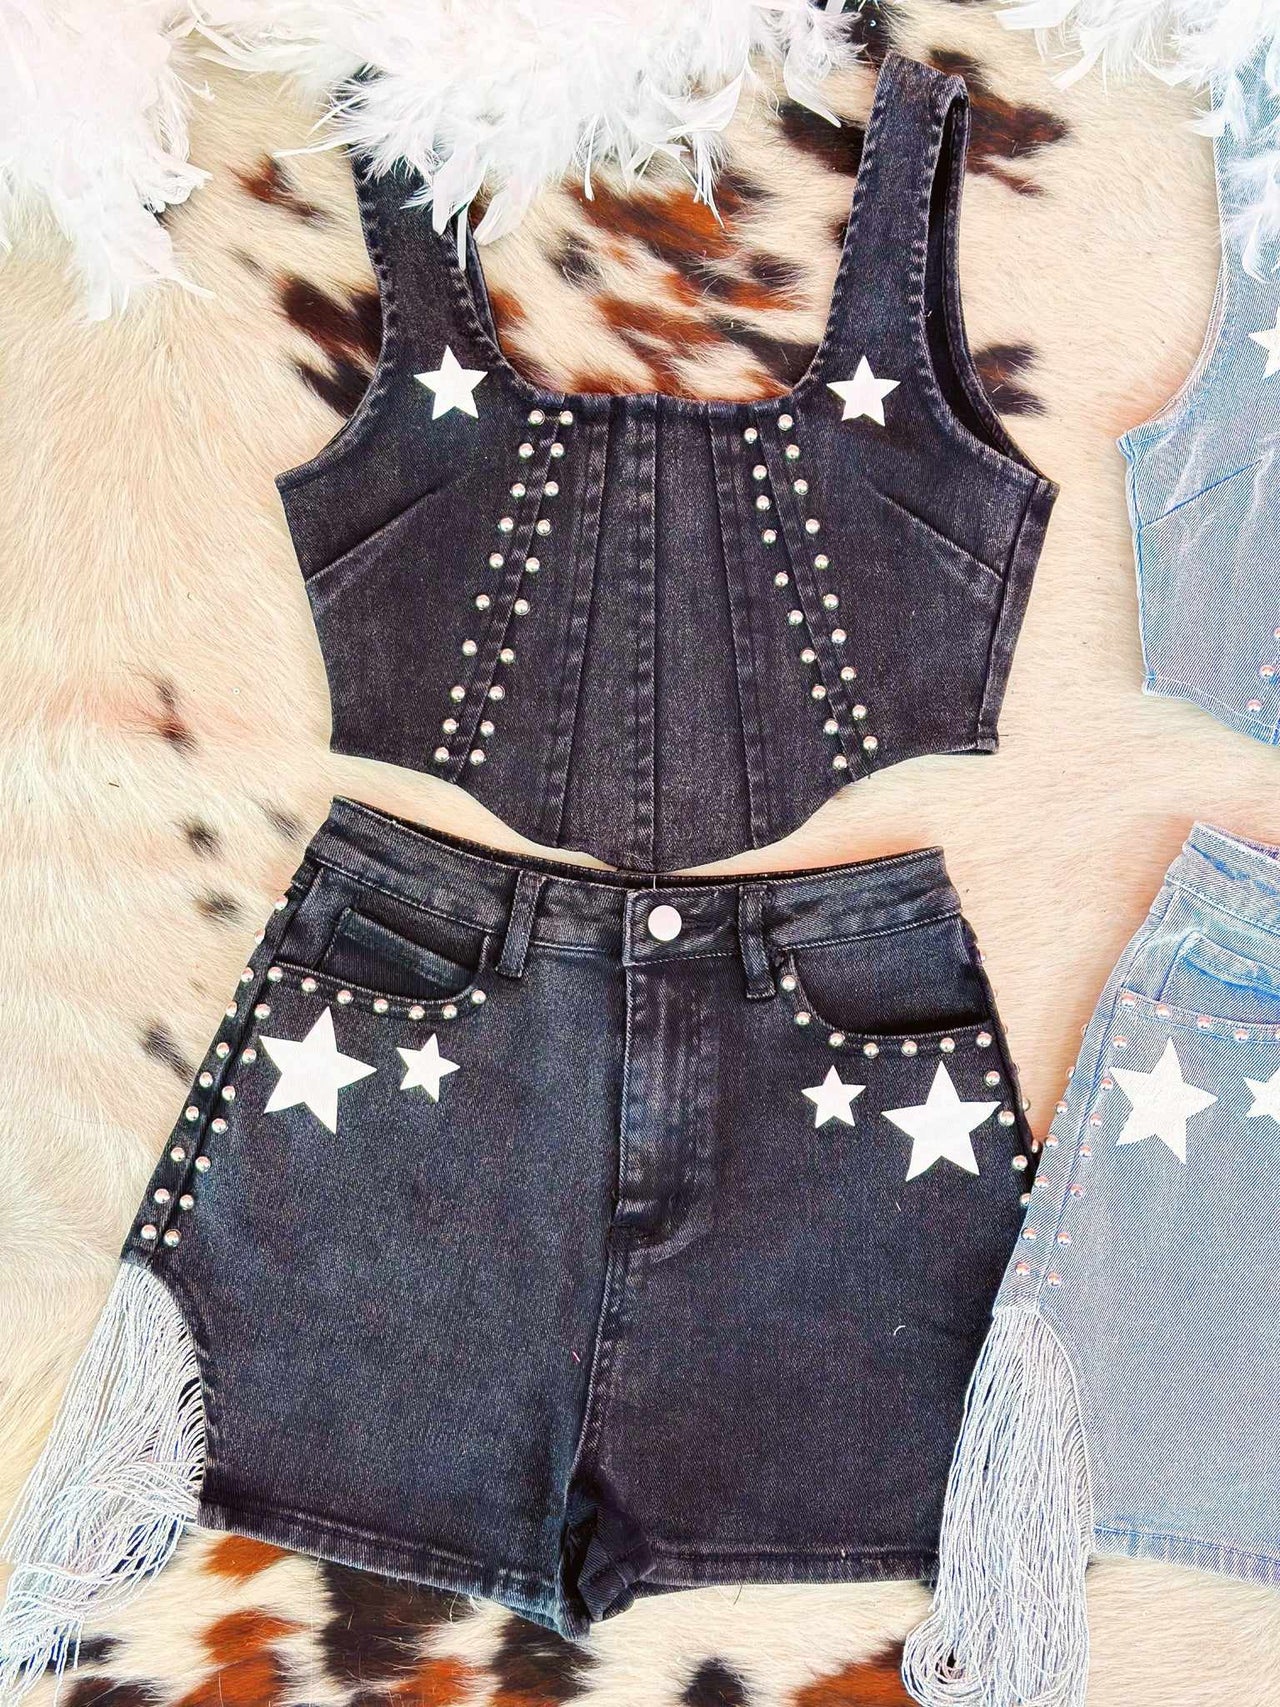 Black denim crop top and shorts with stars.